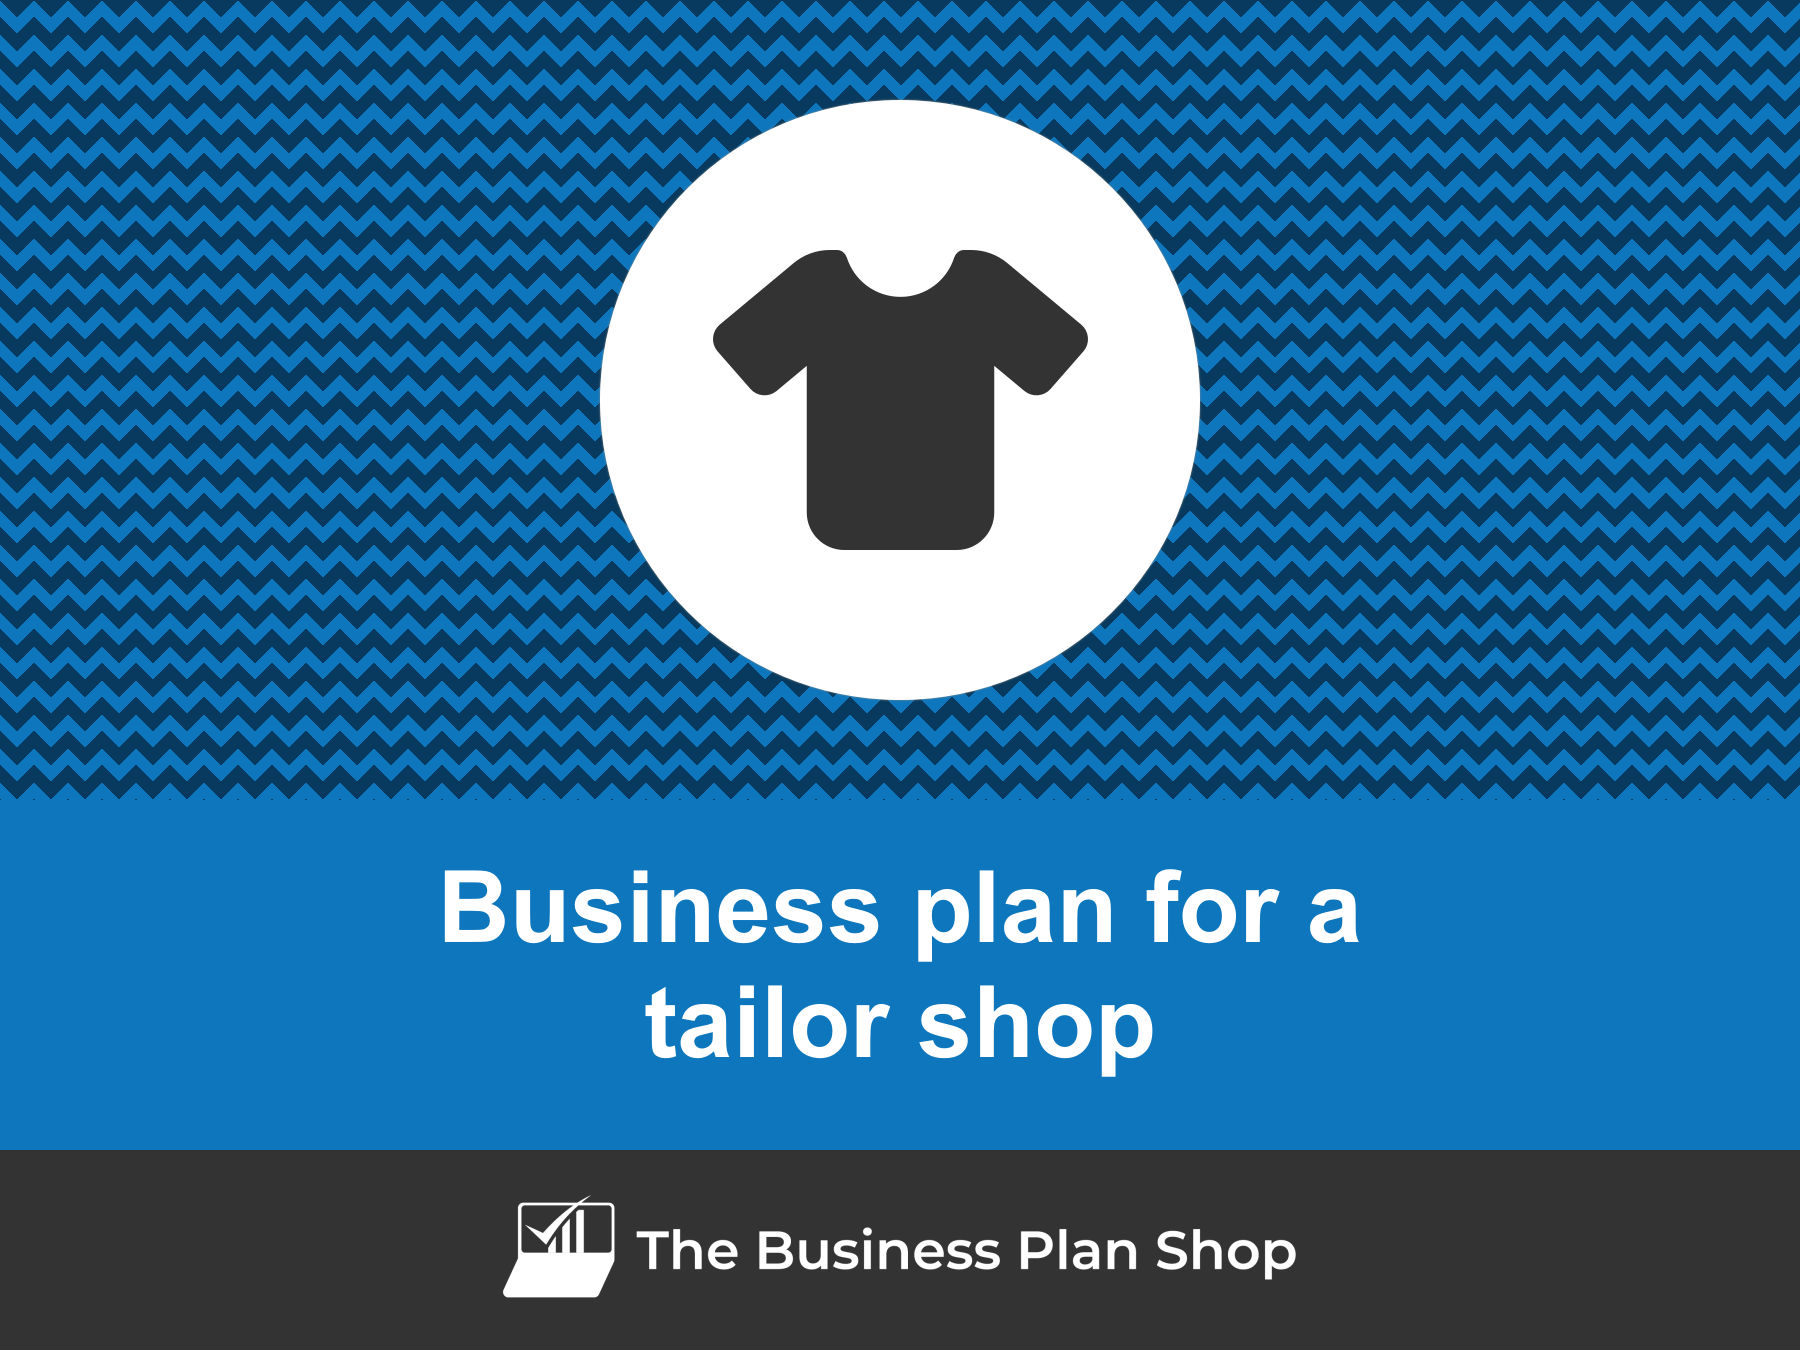 write a business plan on tailoring